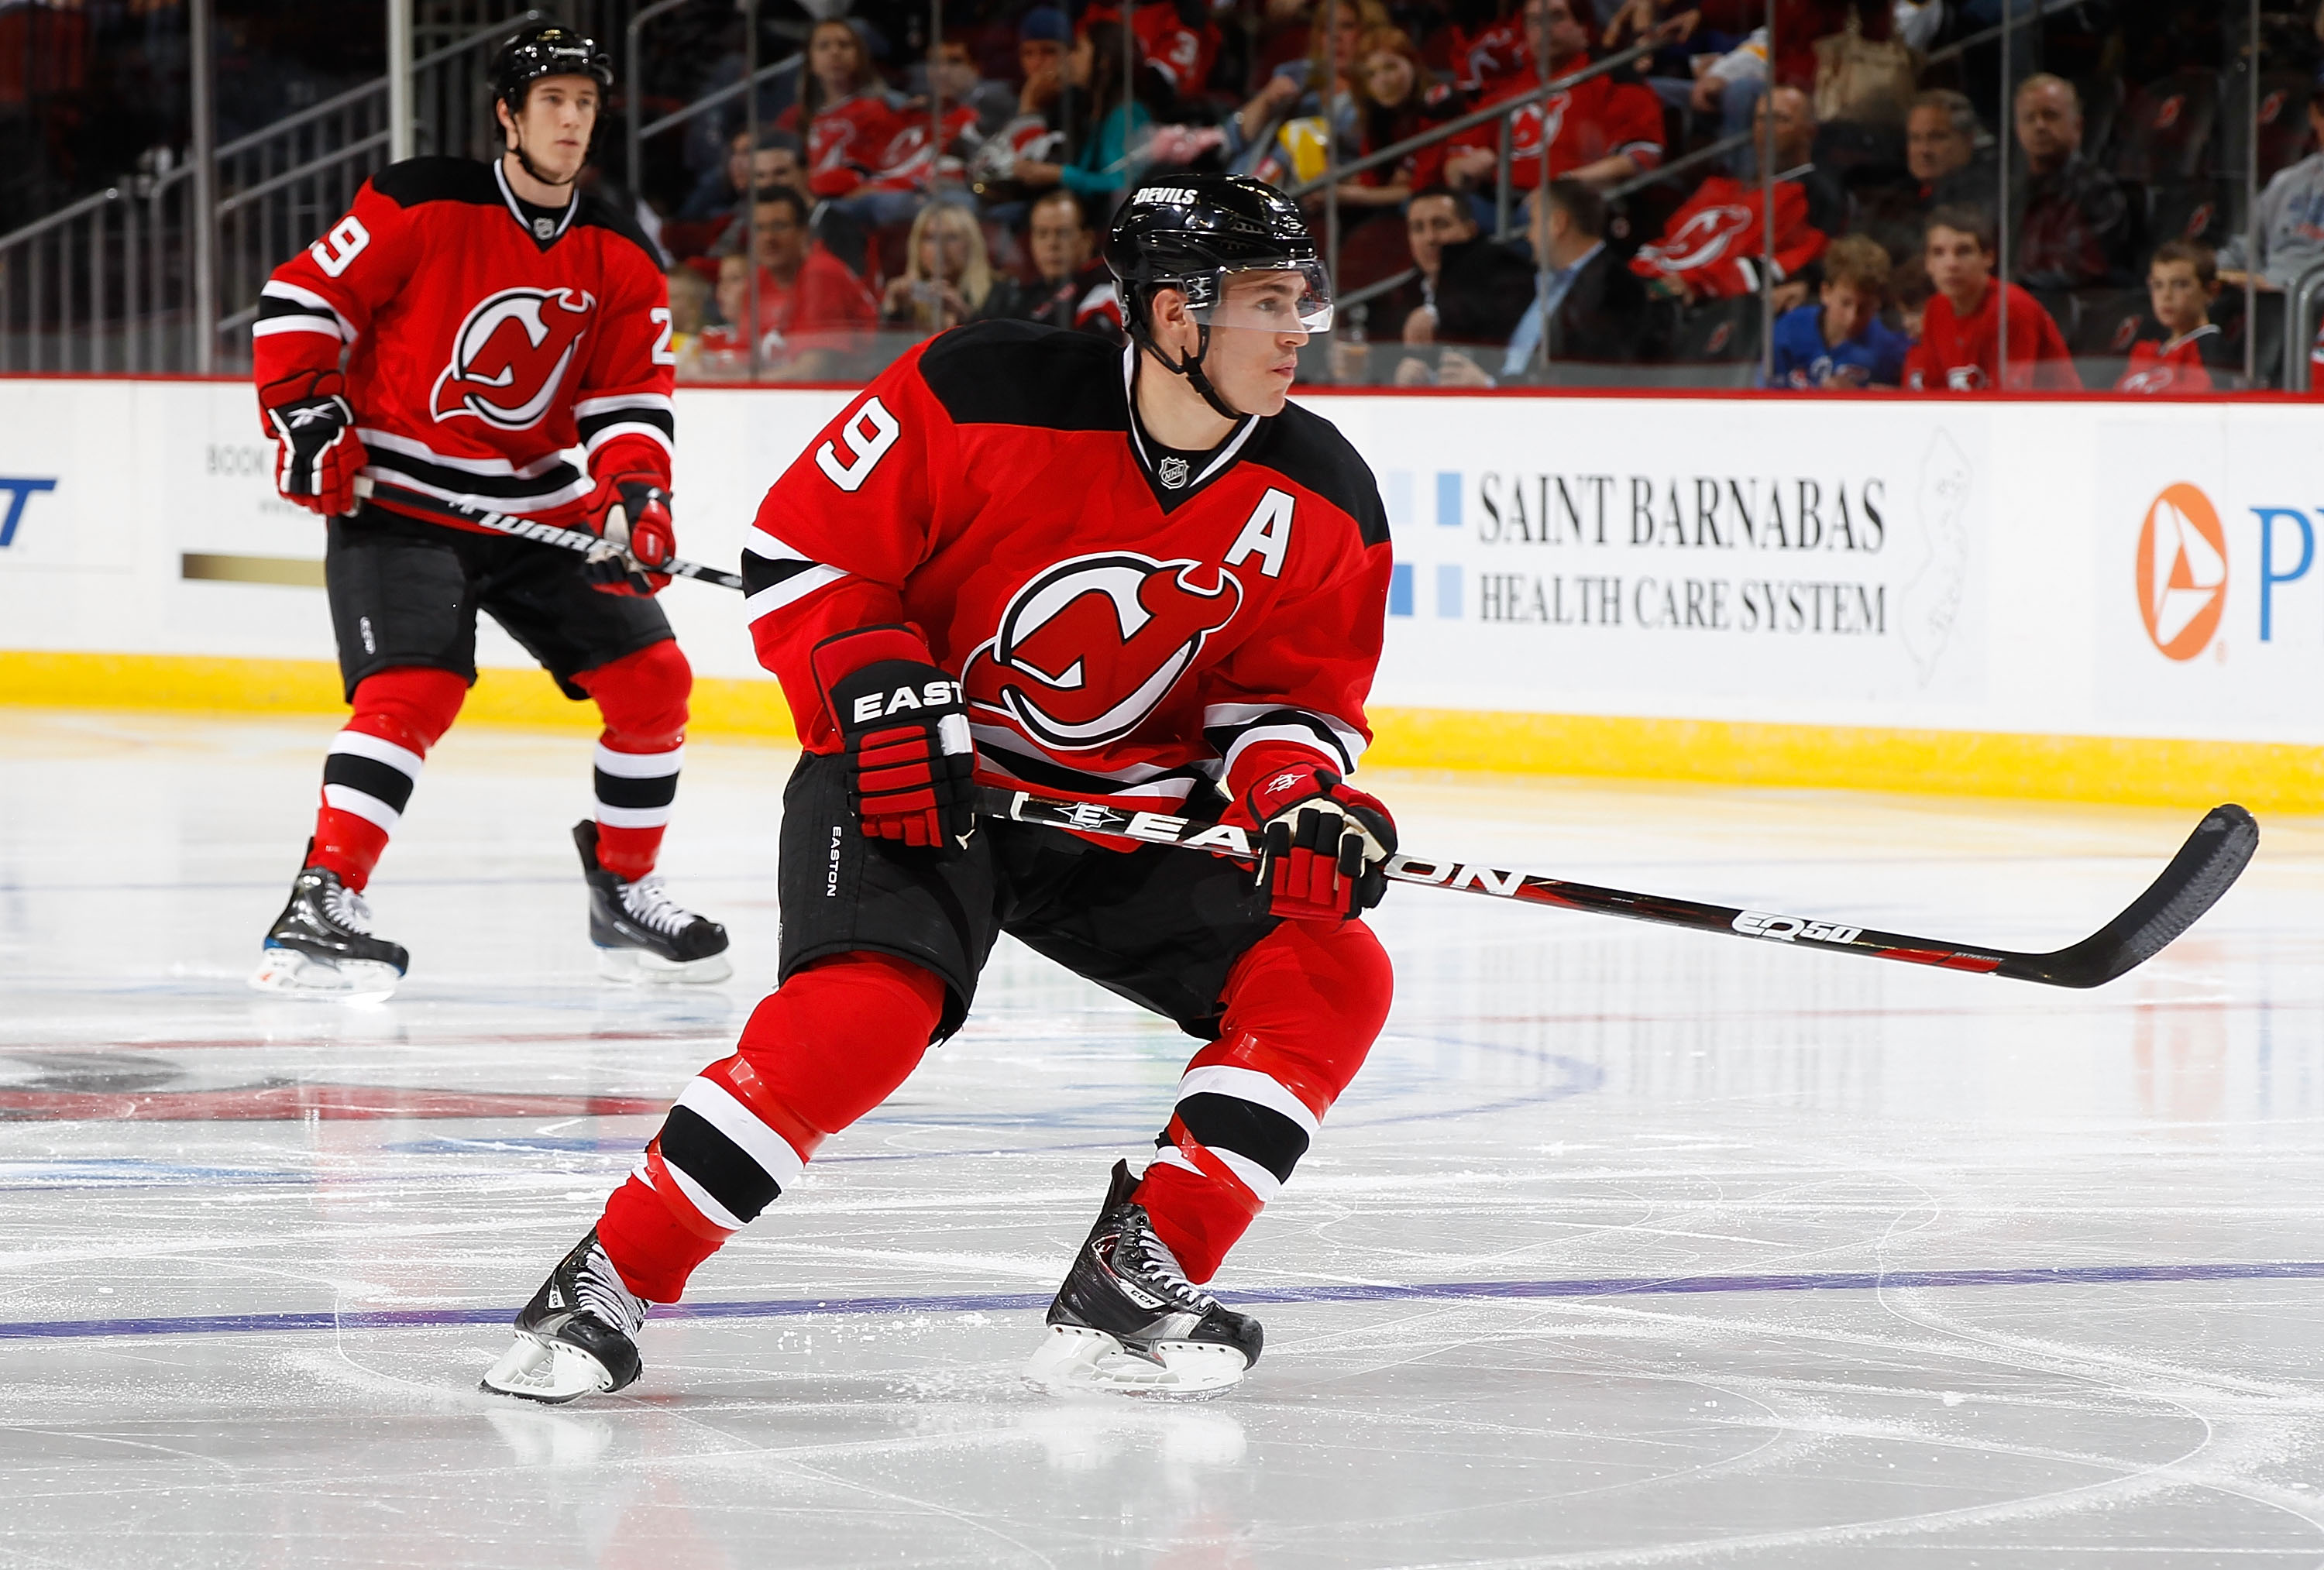 NHL's Week 5 Cold Players: Zach Parise, New Jersey Devils